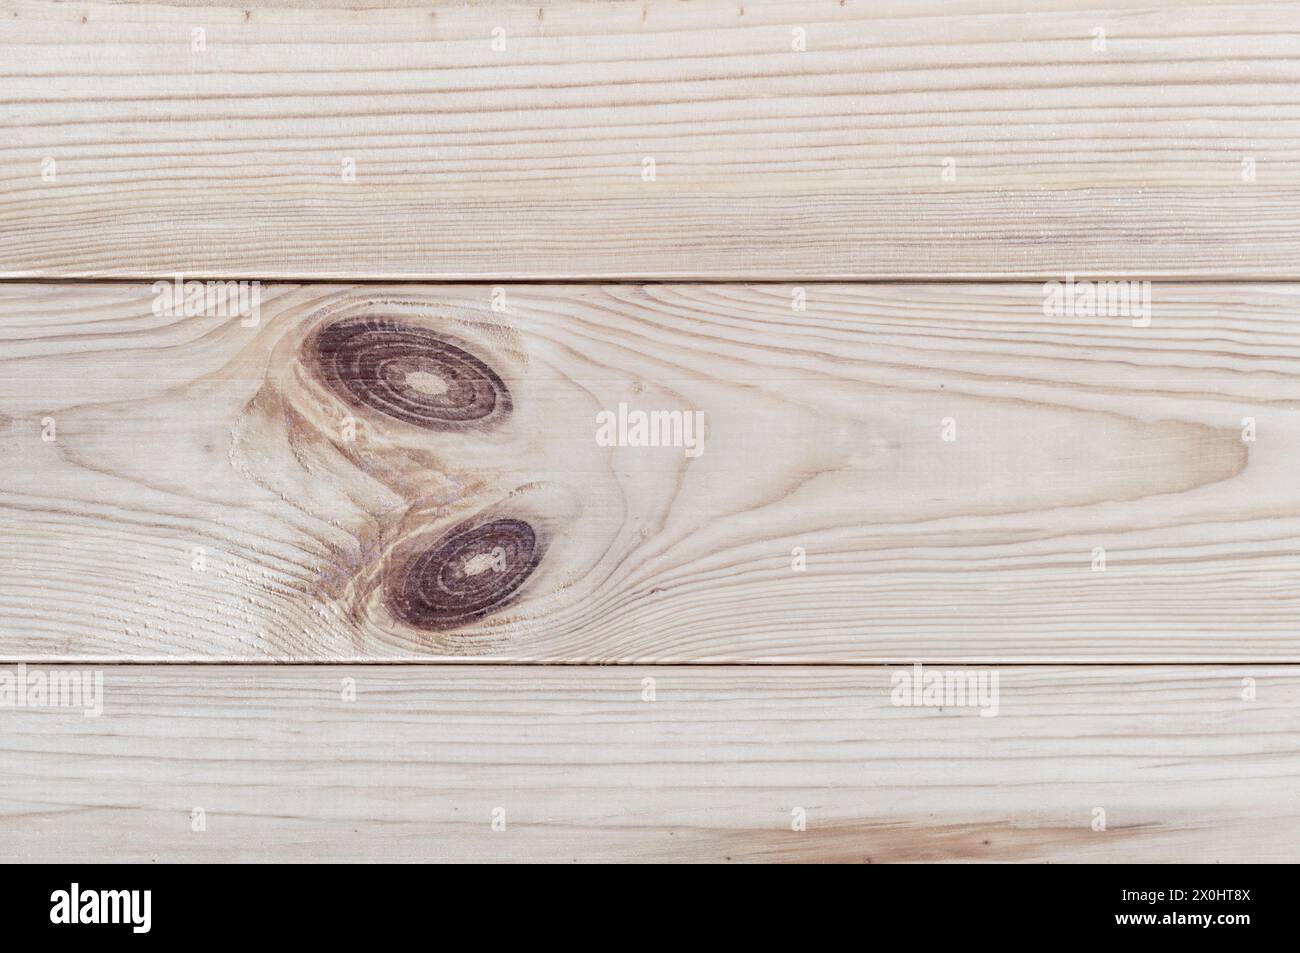 Pine wood planks texture. High-resolution image of natural wood planks with beautiful grain patterns, perfect for your design projects. Stock Photo